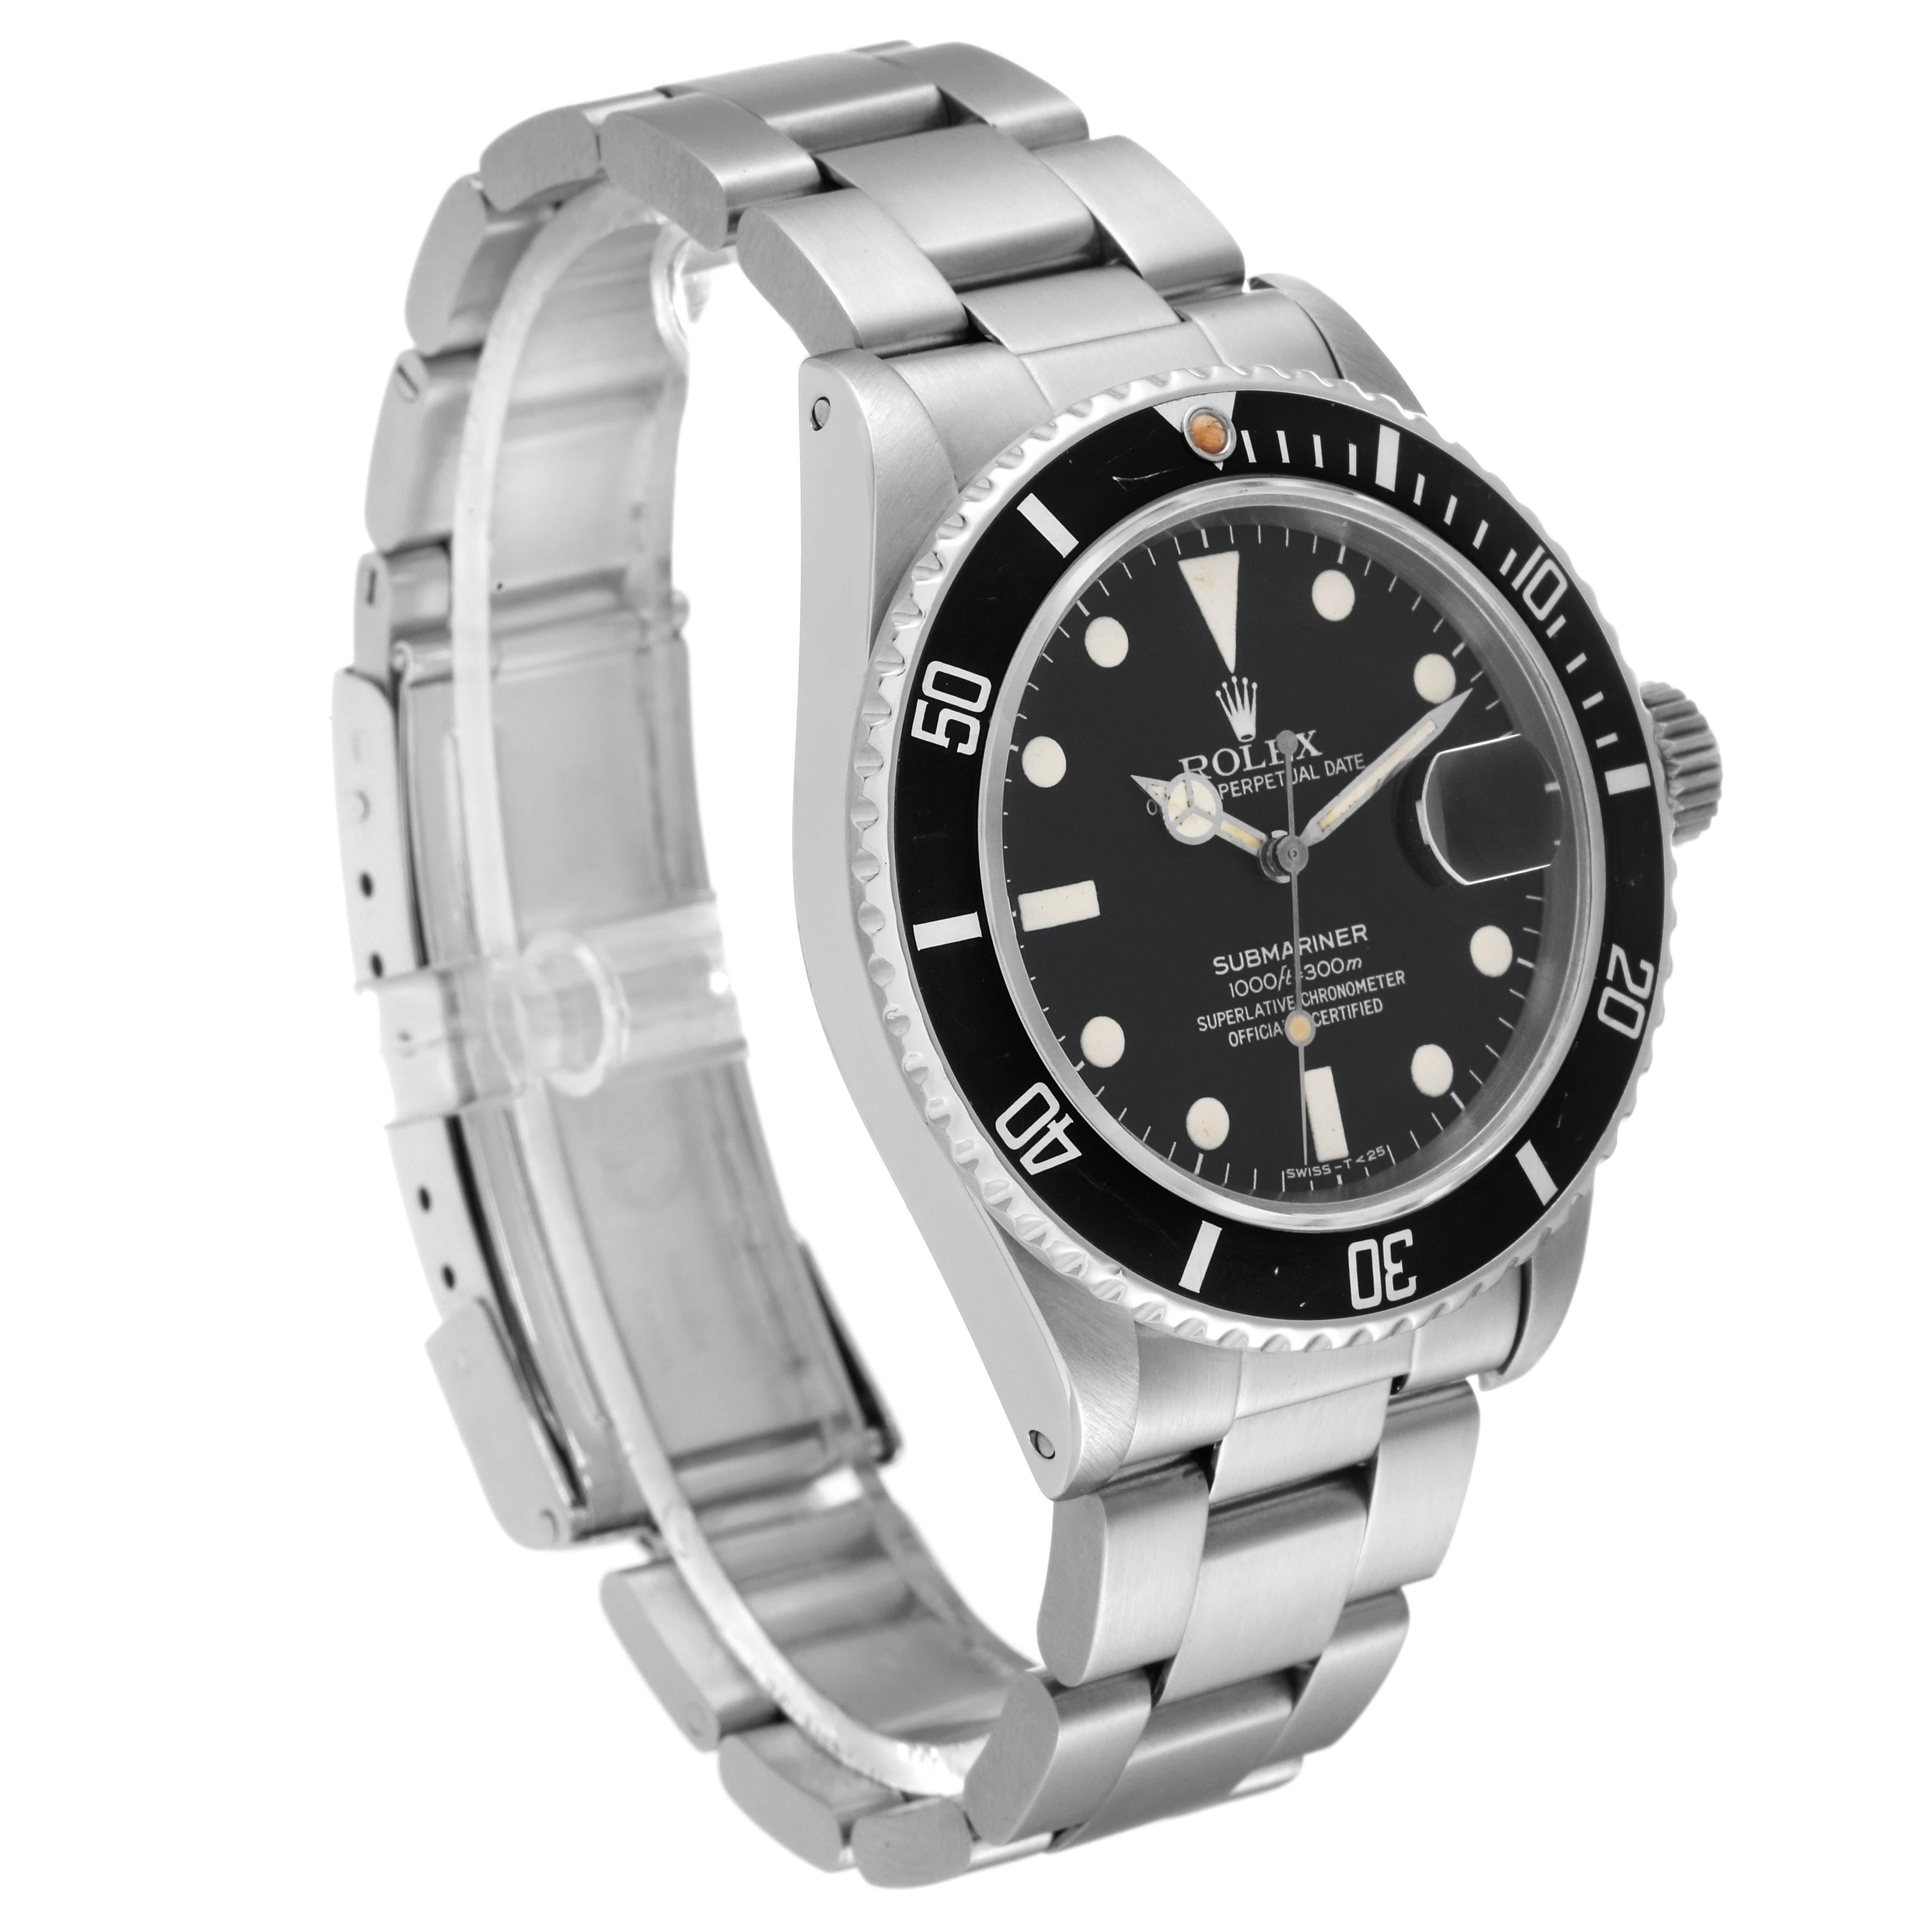 Rolex Submariner Date Steel Vintage Mens Watch 16800 Box Papers In Good Condition For Sale In Atlanta, GA